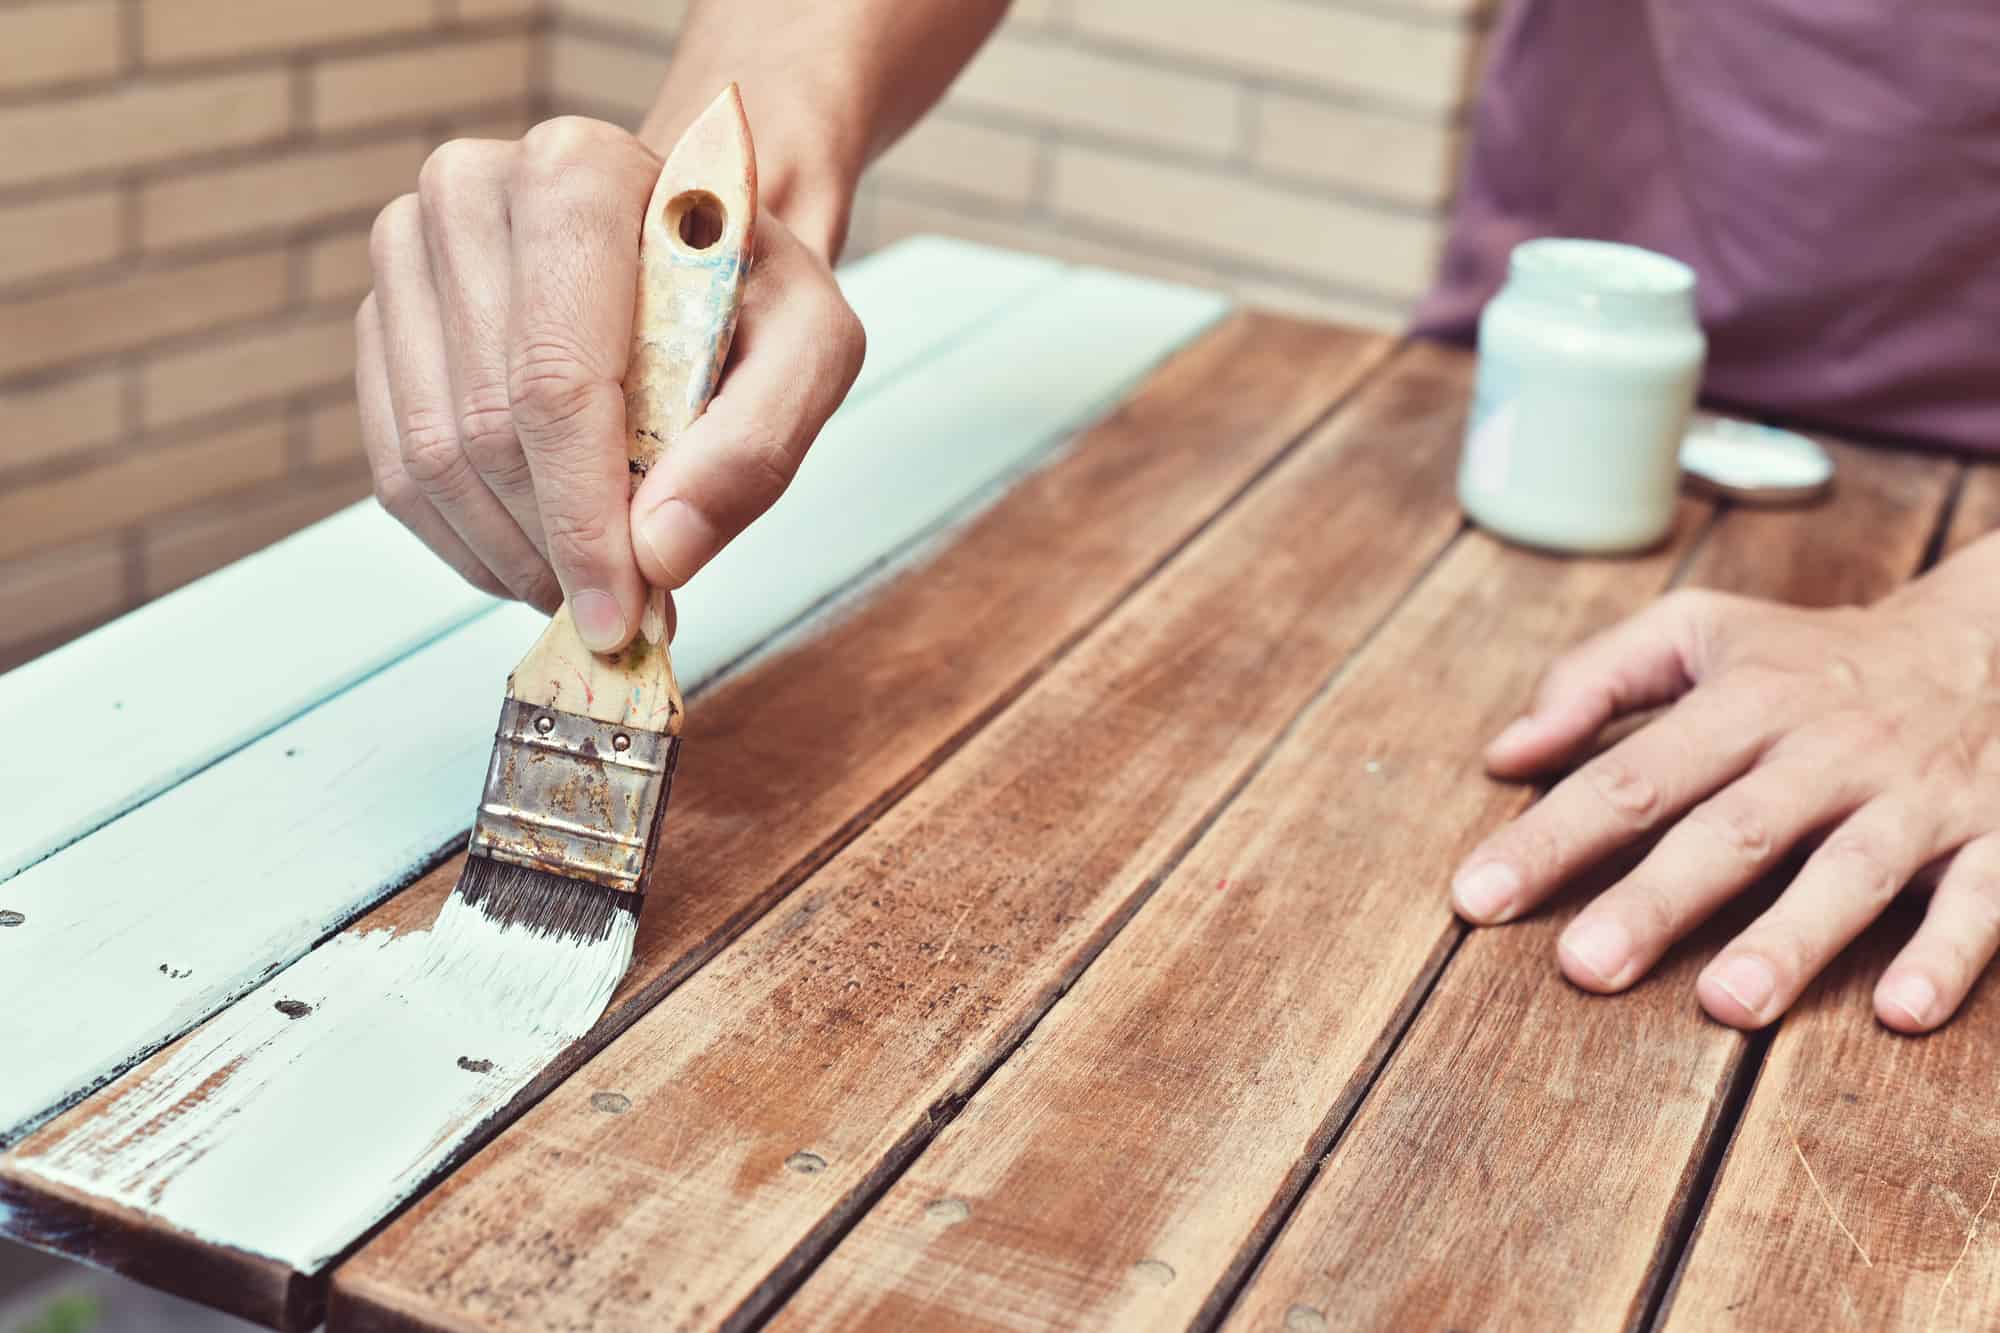 painting wooden table using washable paints